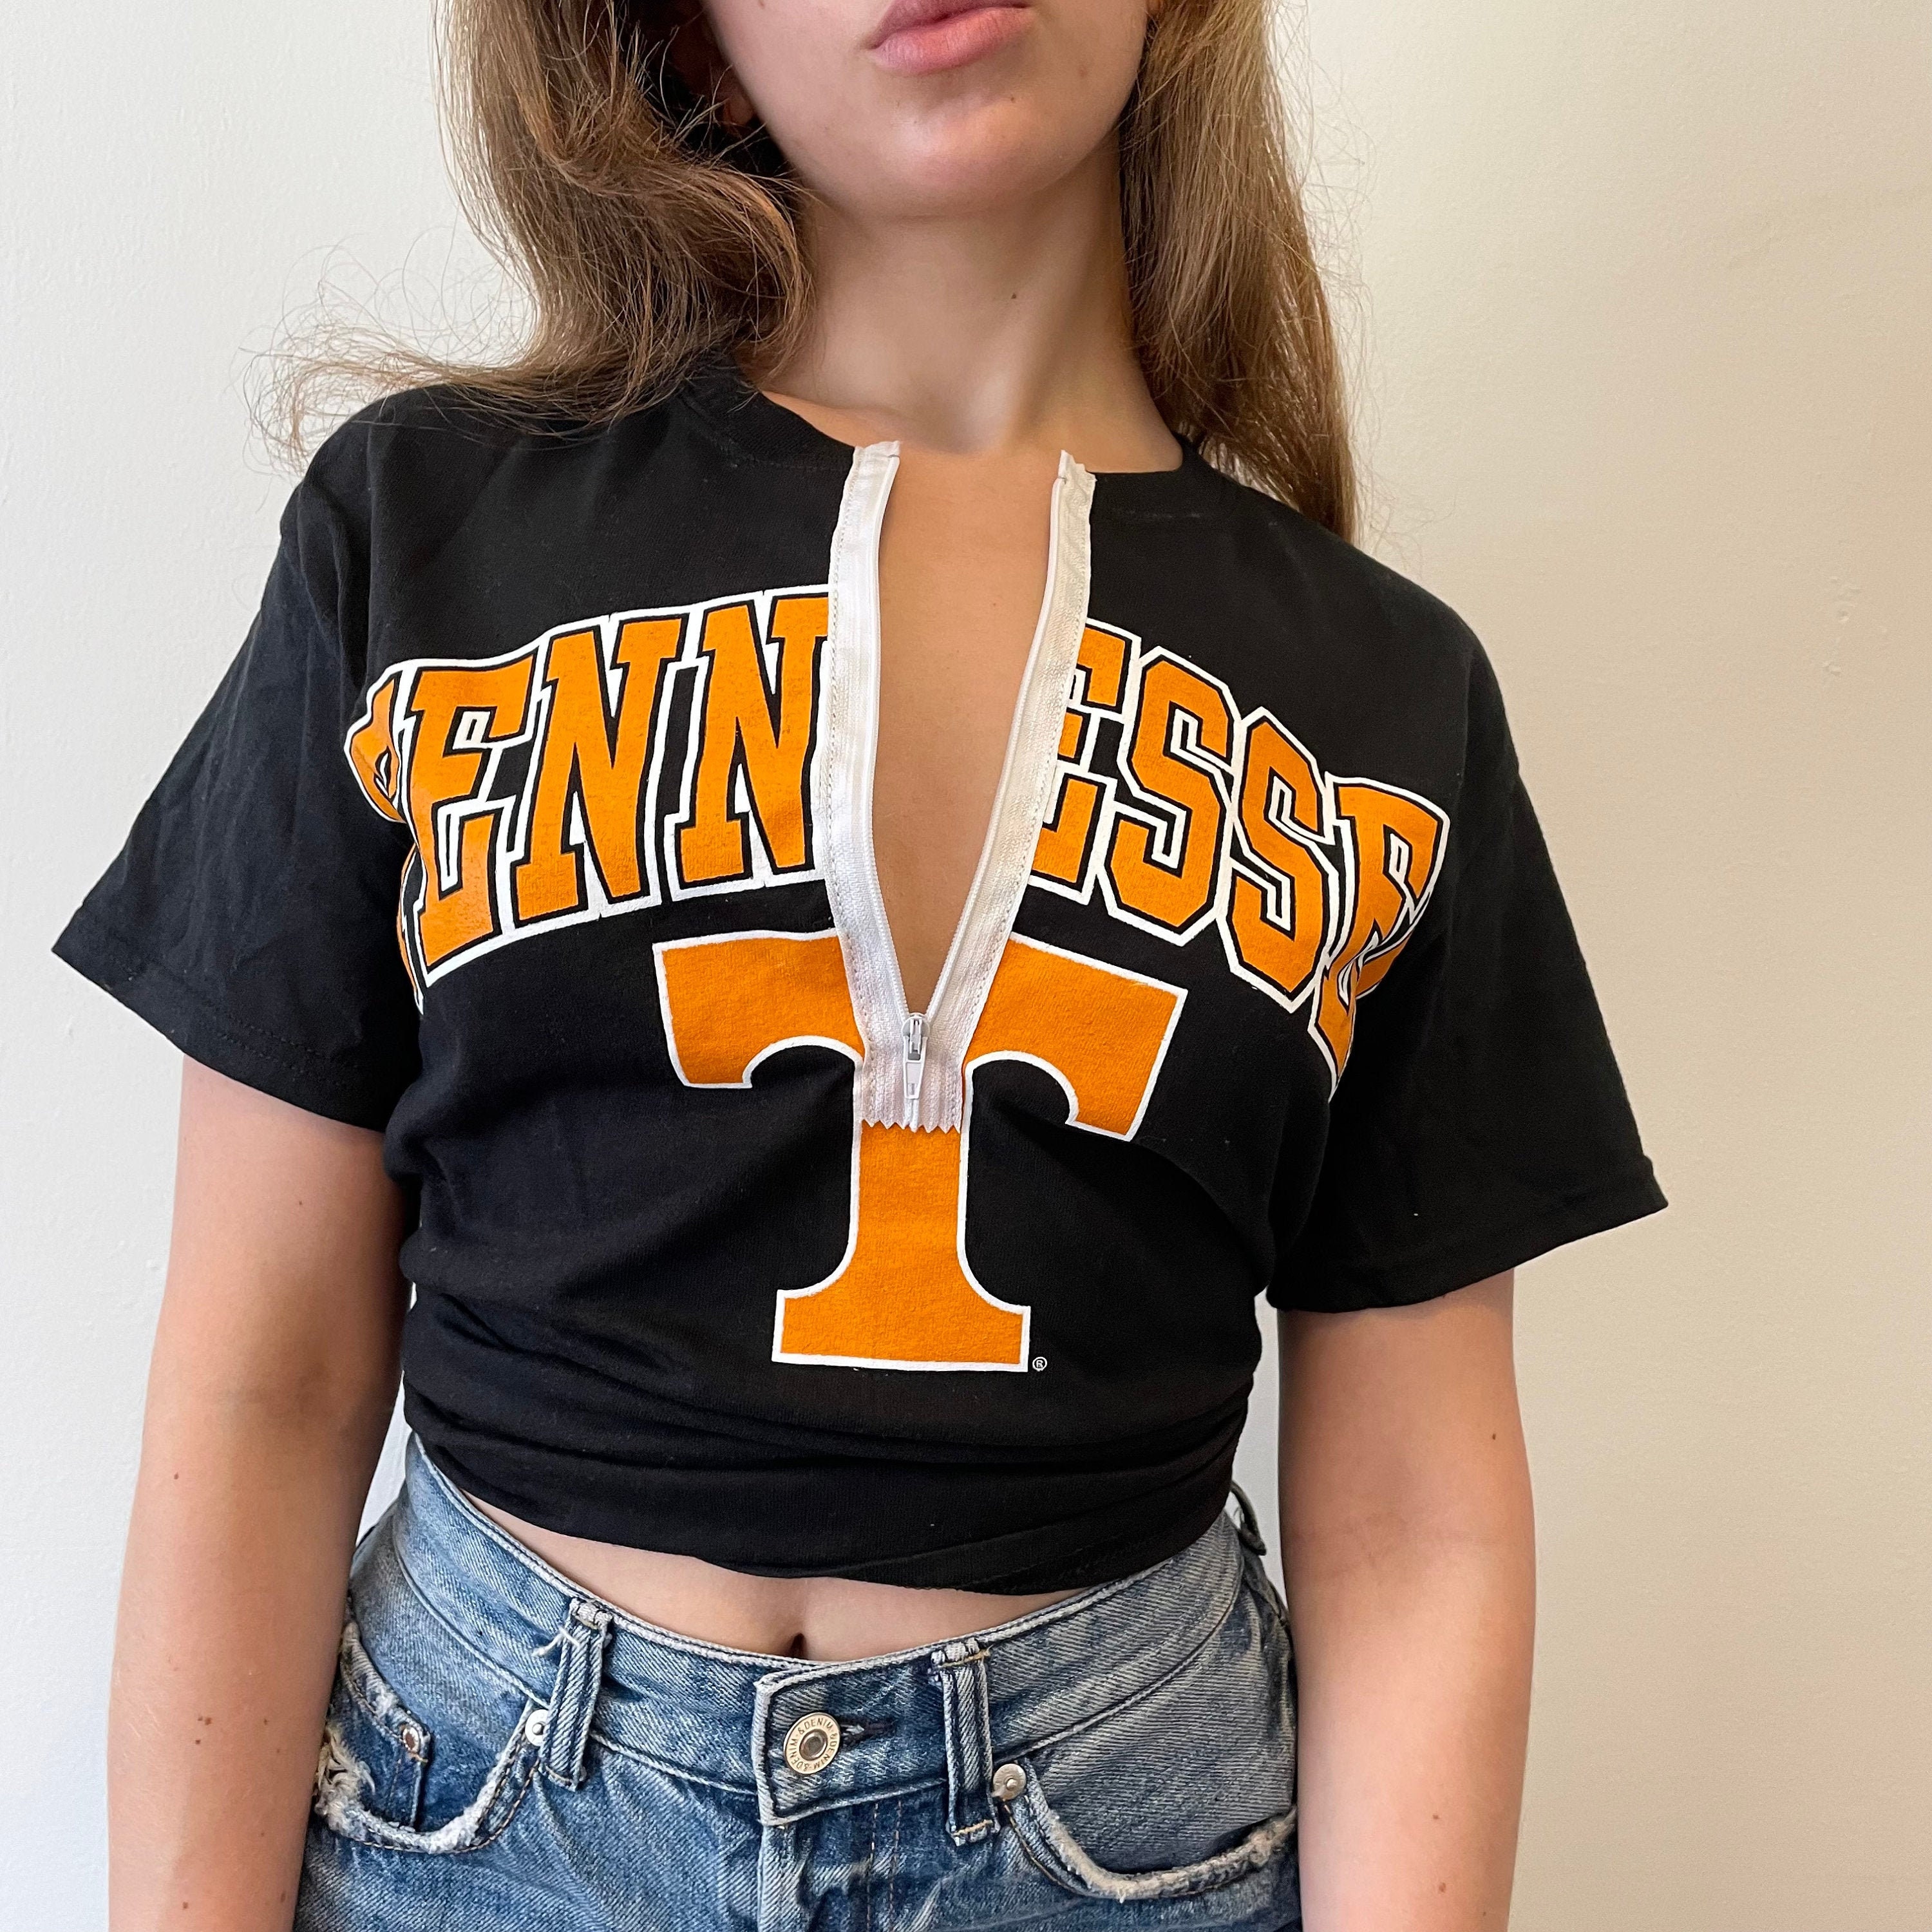 Tennessee Volunteers Quarter Zip T-shirt / Tailgate Clothing / | Etsy